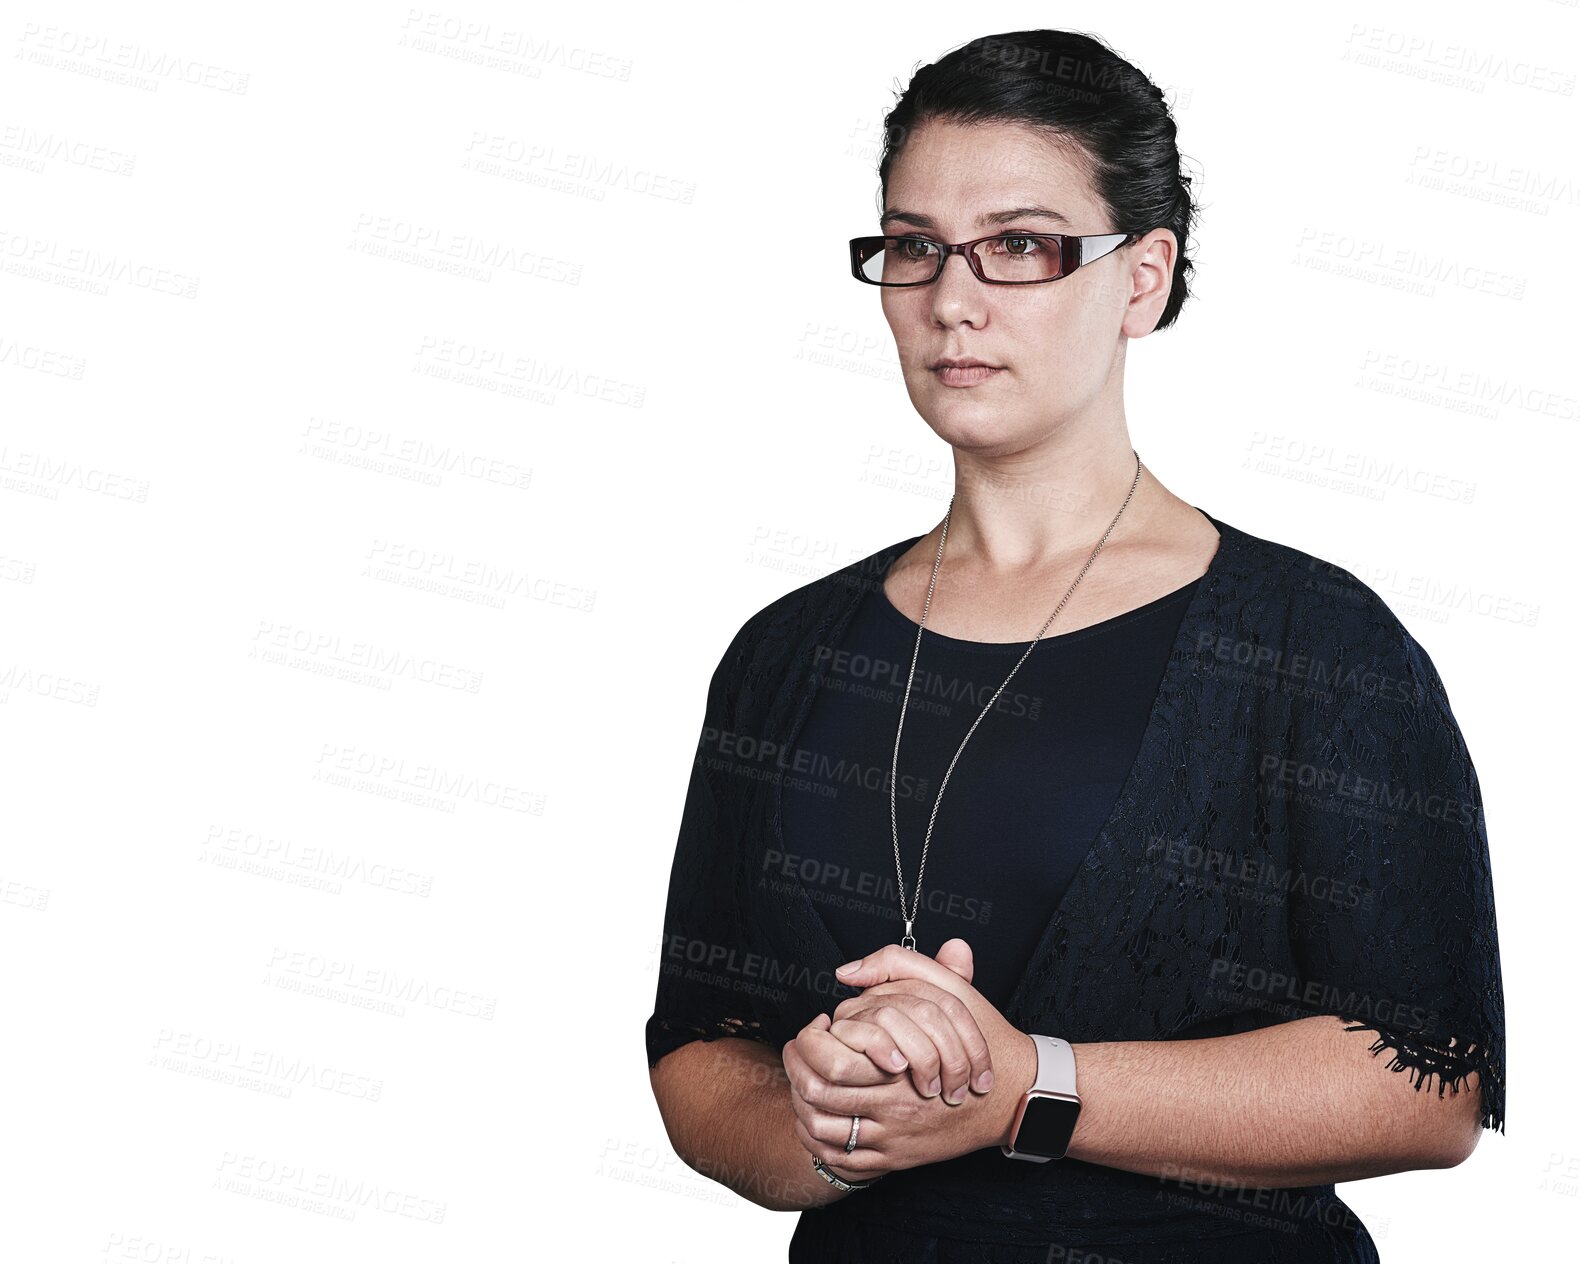 Buy stock photo Teacher, woman is serious or stern in glasses for education and academic professional on png transparent background. Educator, school or university professor for learning, knowledge and vision